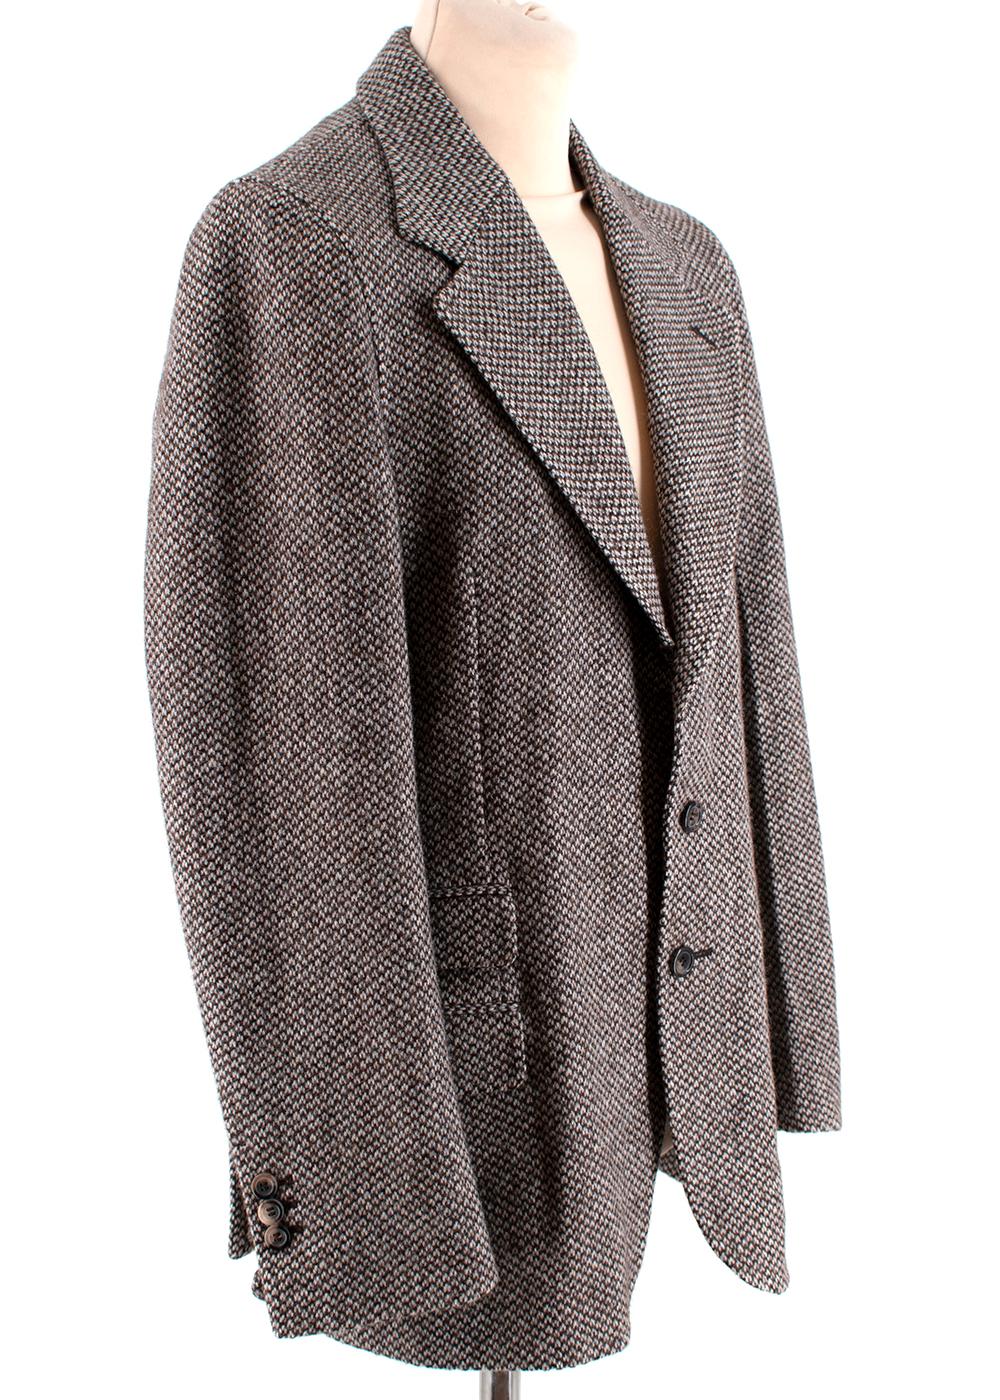 Yves Saint Laurent Mens Tweed Blazer

- Rive Gauche collection .      
- Thick blend of wool 
- Two tone cream and brown weave
- Tortoise shell shiny buttons
- Revere collar
- Mens size 50 Regular
- Smaller tortoise buttons on the cuffs
- YSL